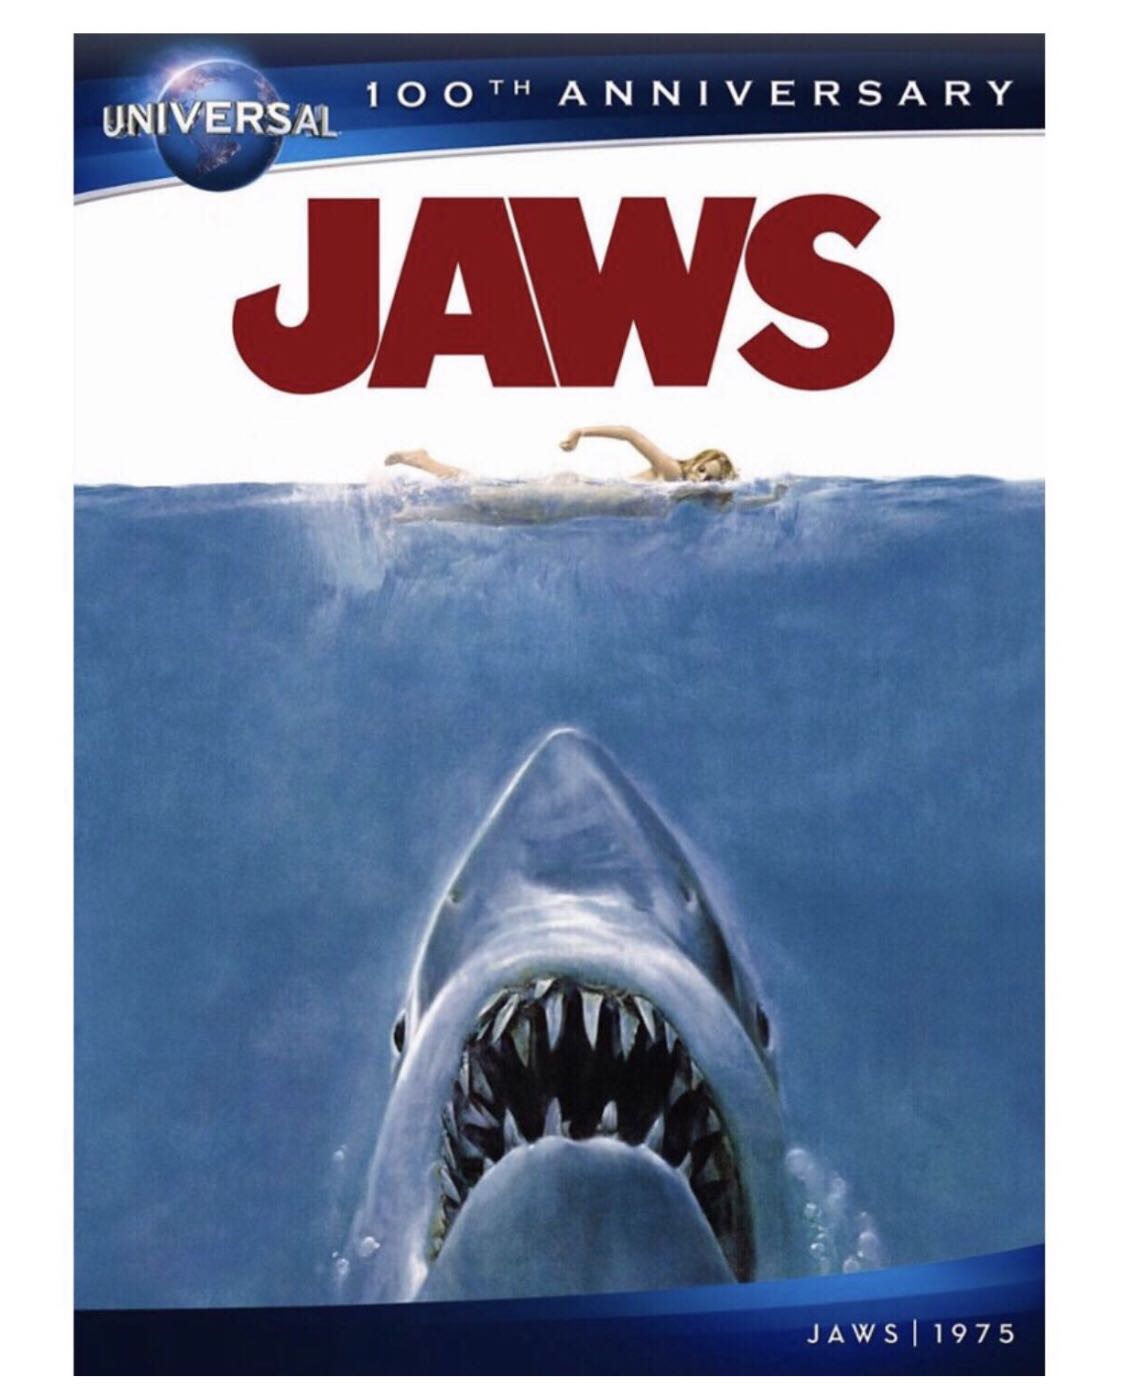 Jaws : 30th Anniversary Edition DVD movie collectible [Barcode 025192817120] - Main Image 3